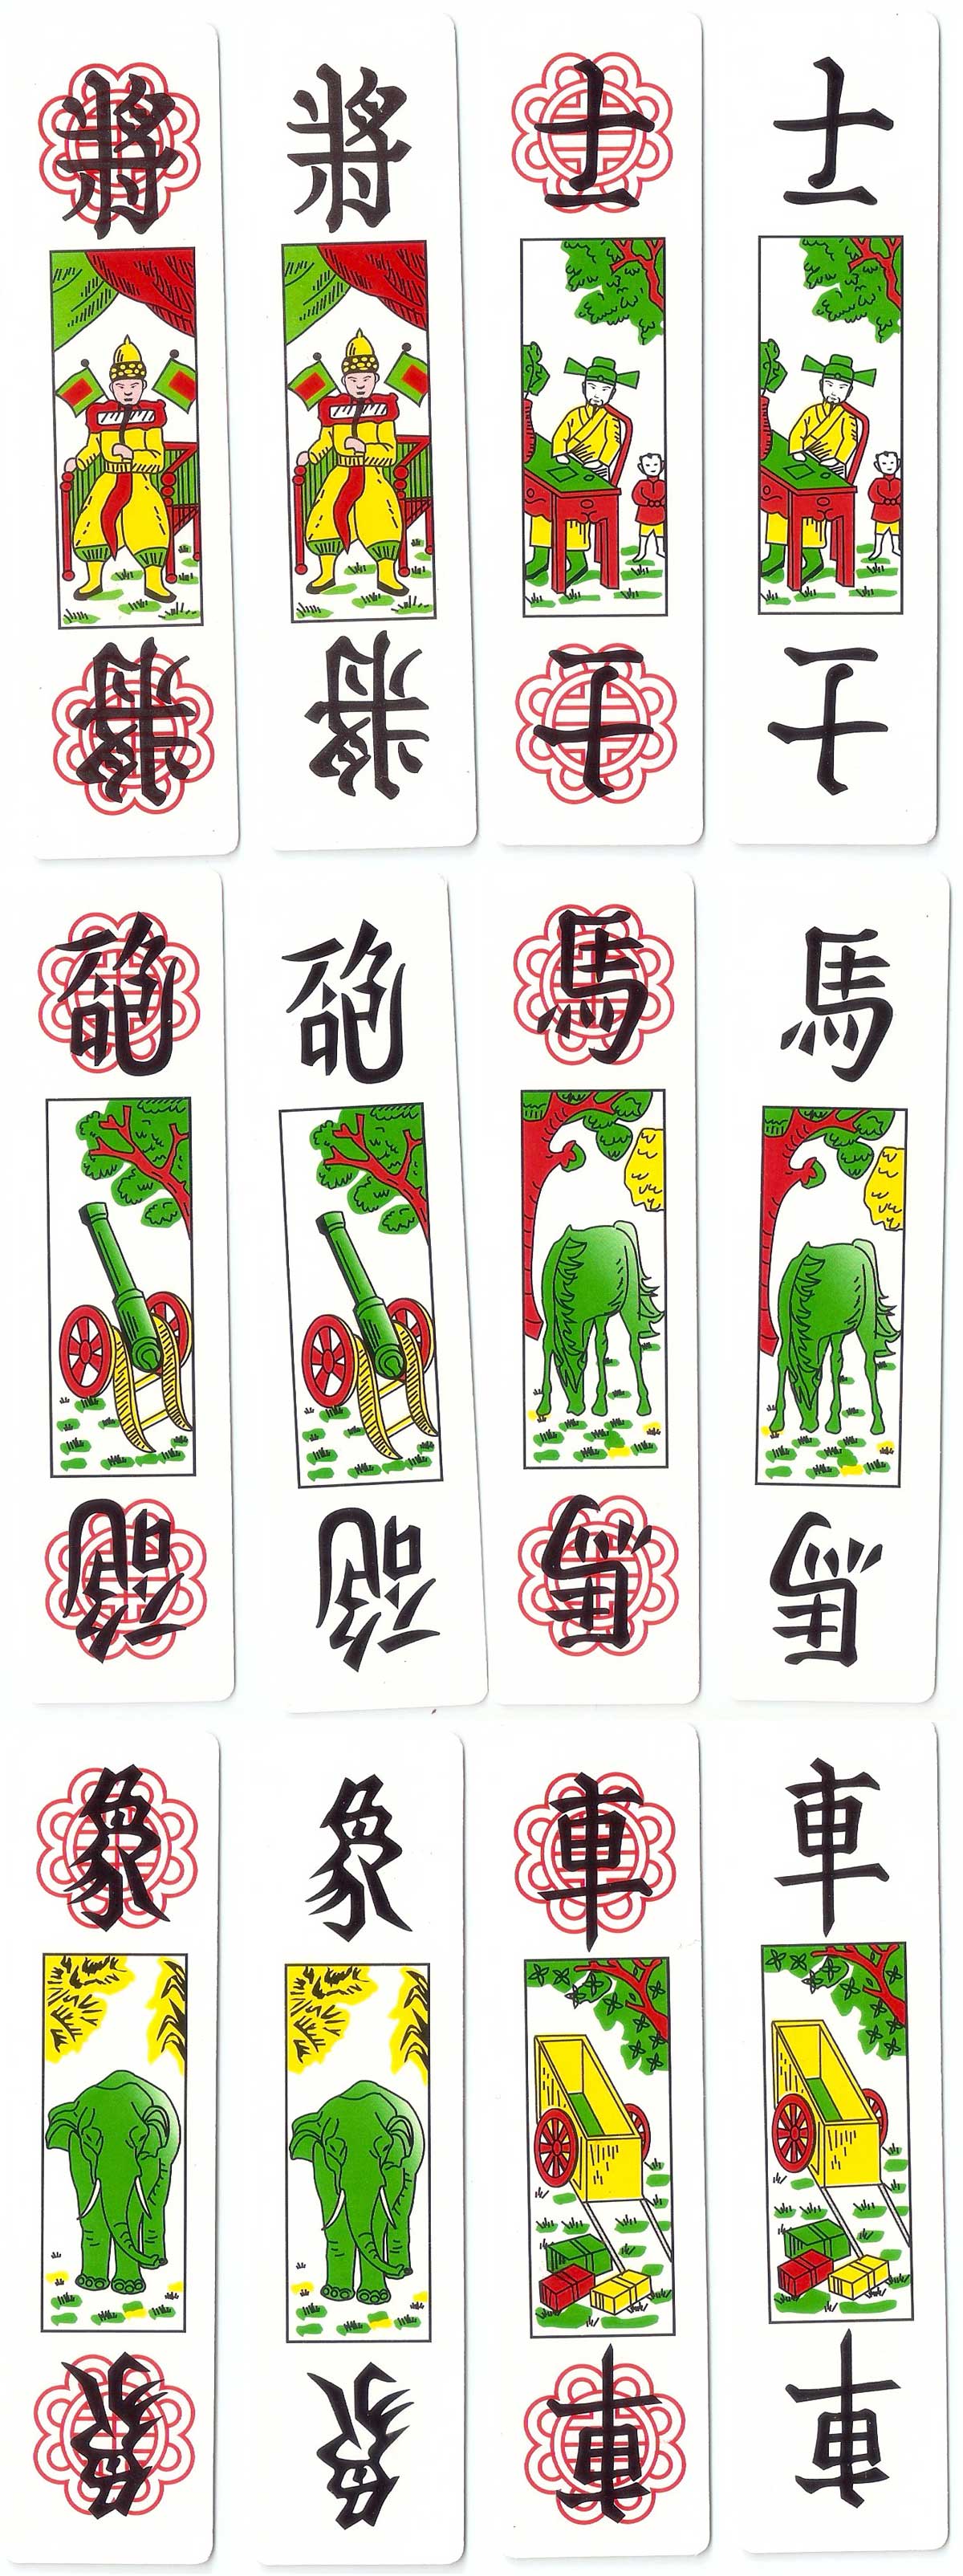 Tam cúc playing cards from Vietnam, 2016